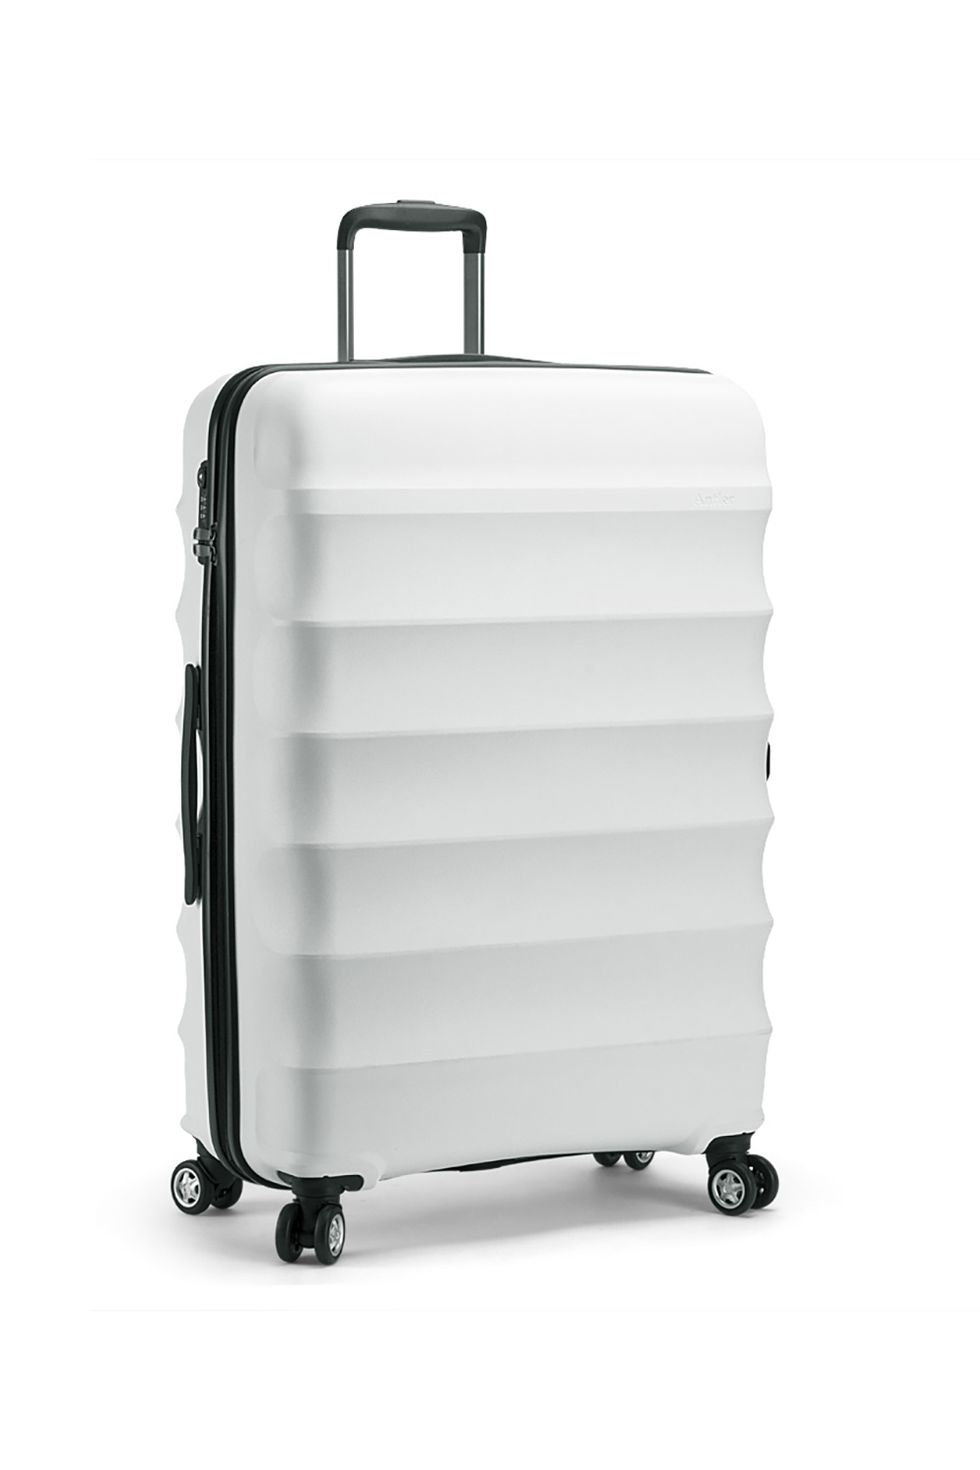 <p>They've been in business for more than a century, so what more do you need to know? But just in case, their Juno model has a rep for being ultra light and roomy.&nbsp;</p><p>$177, <a href="http://www.luggagedirect.com.au/antler-juno-79cm-large-lightweight-4-wheel-suitcase-white.html" target="_blank" data-tracking-id="recirc-text-link">luggagedirect.com</a>.</p>